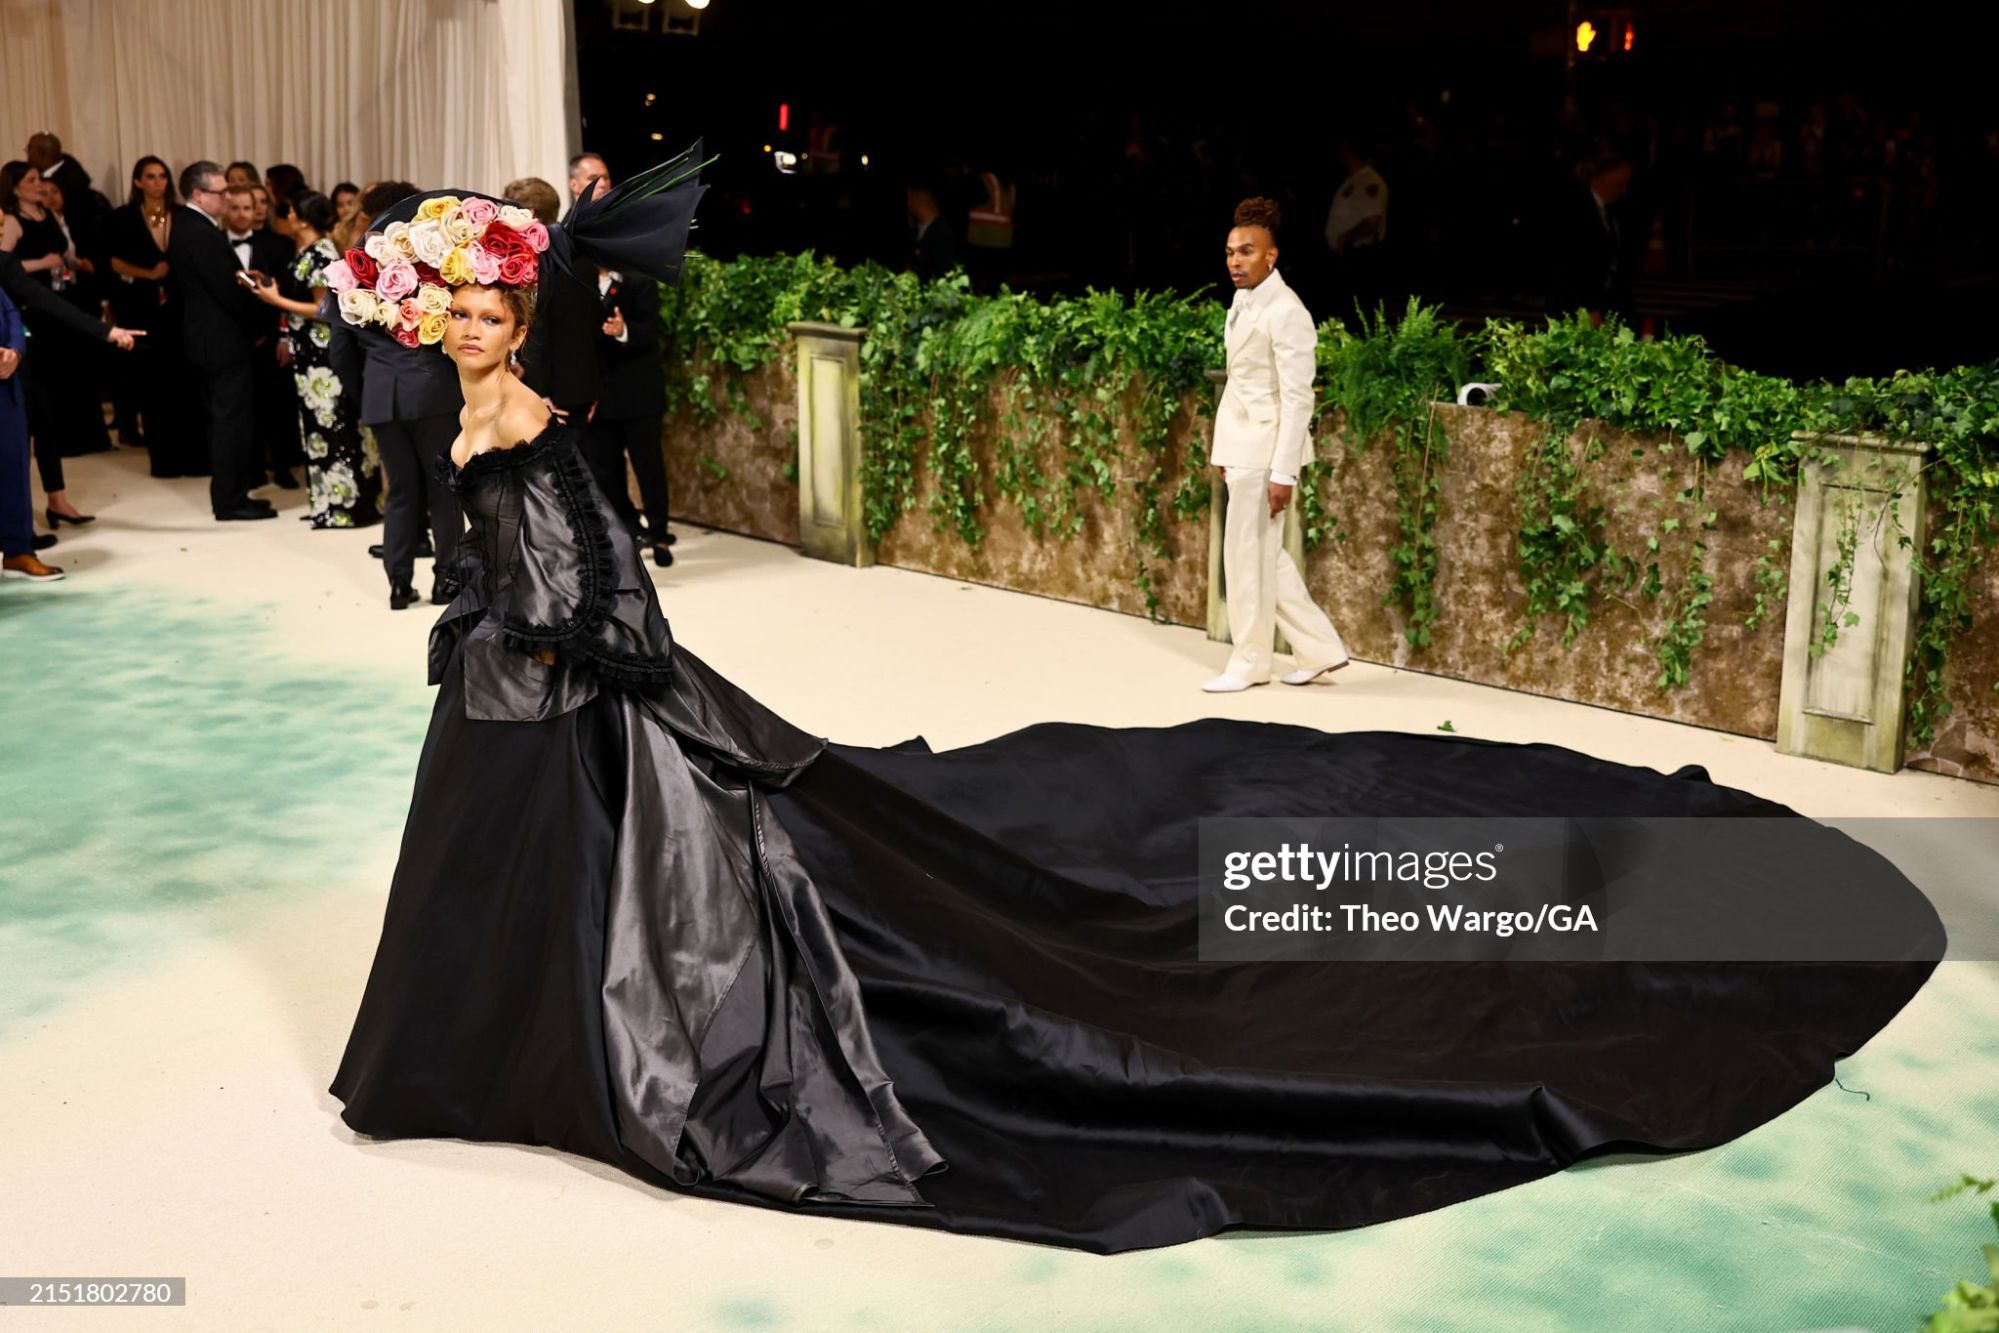 gettyimages-2151802780-2048x2048.jpg